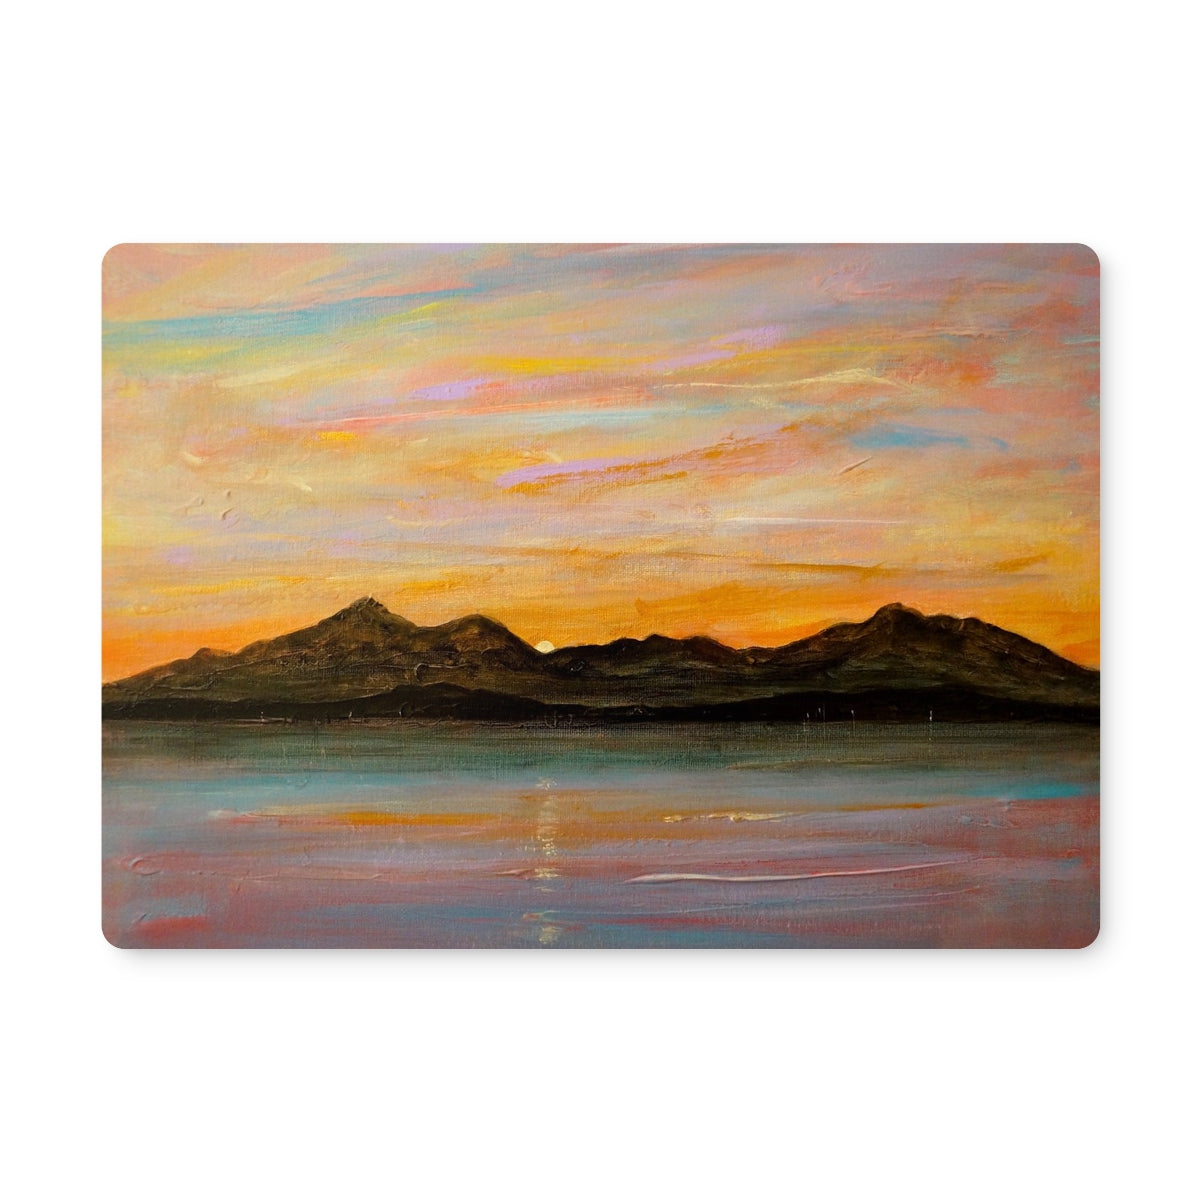 The Sleeping Warrior Arran Art Gifts Placemat-Placemats-Arran Art Gallery-2 Placemats-Paintings, Prints, Homeware, Art Gifts From Scotland By Scottish Artist Kevin Hunter